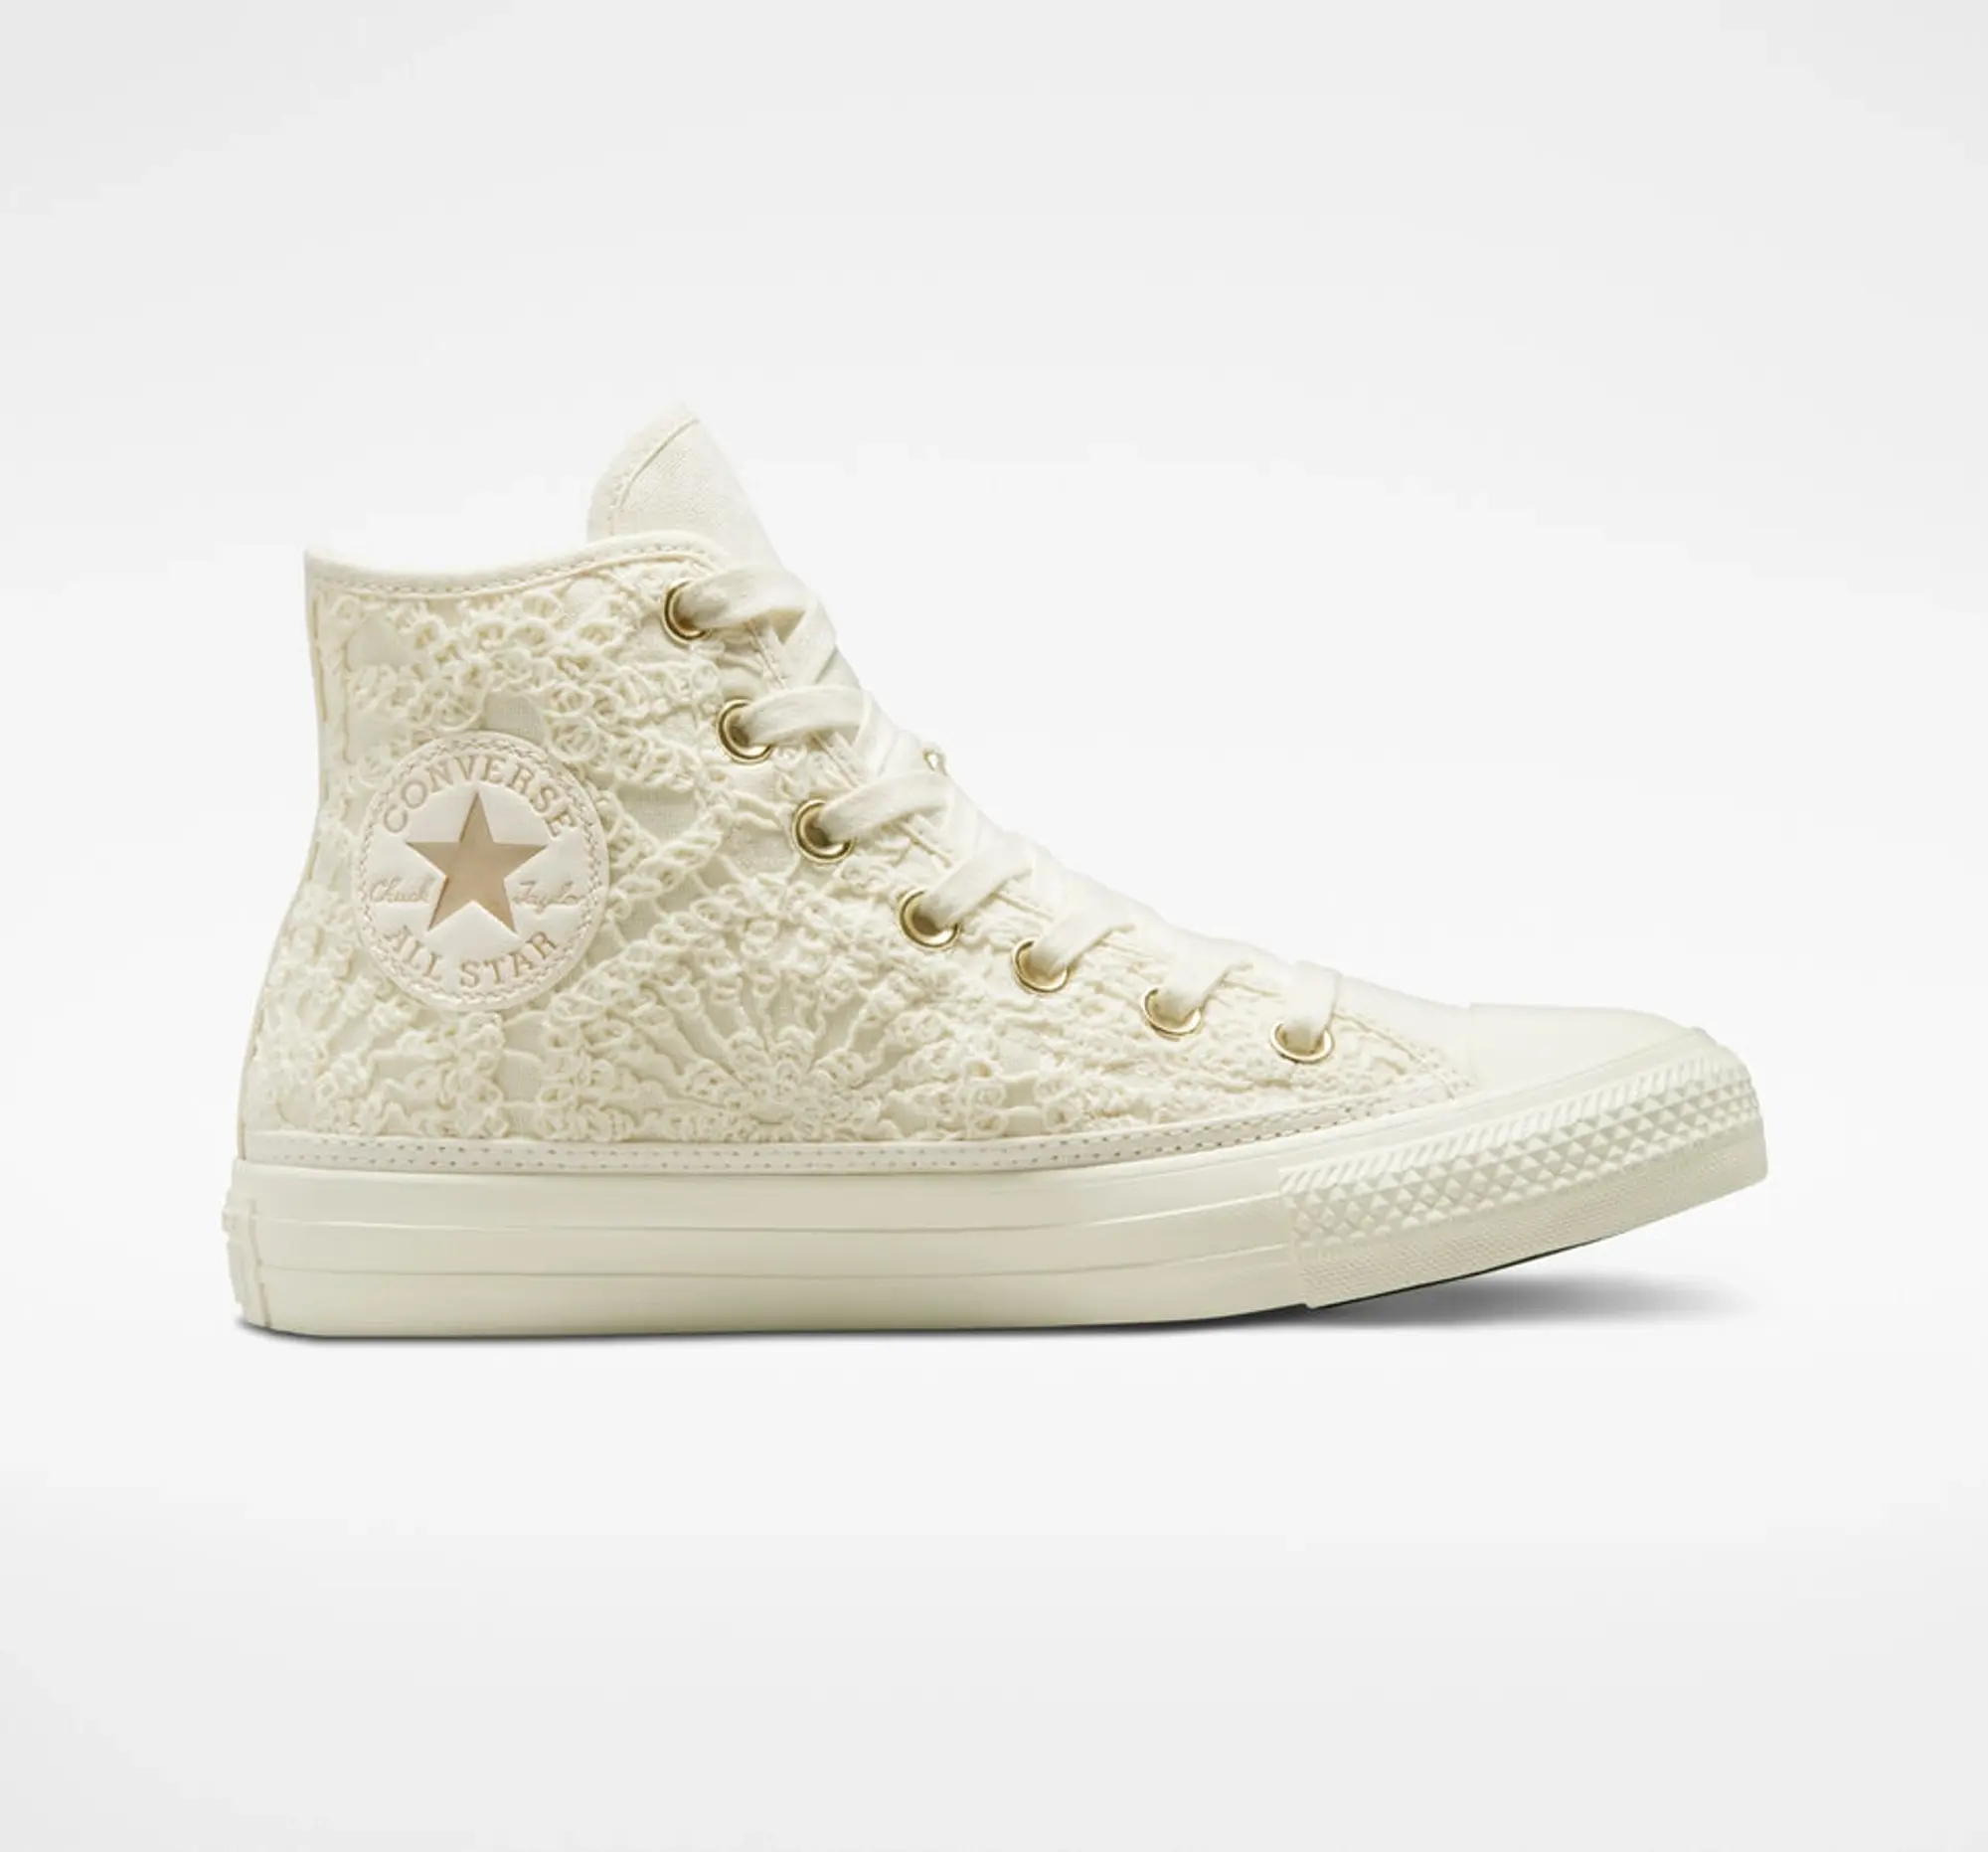 Converse Chuck Taylor All Star Crochet Hi Trainers In White